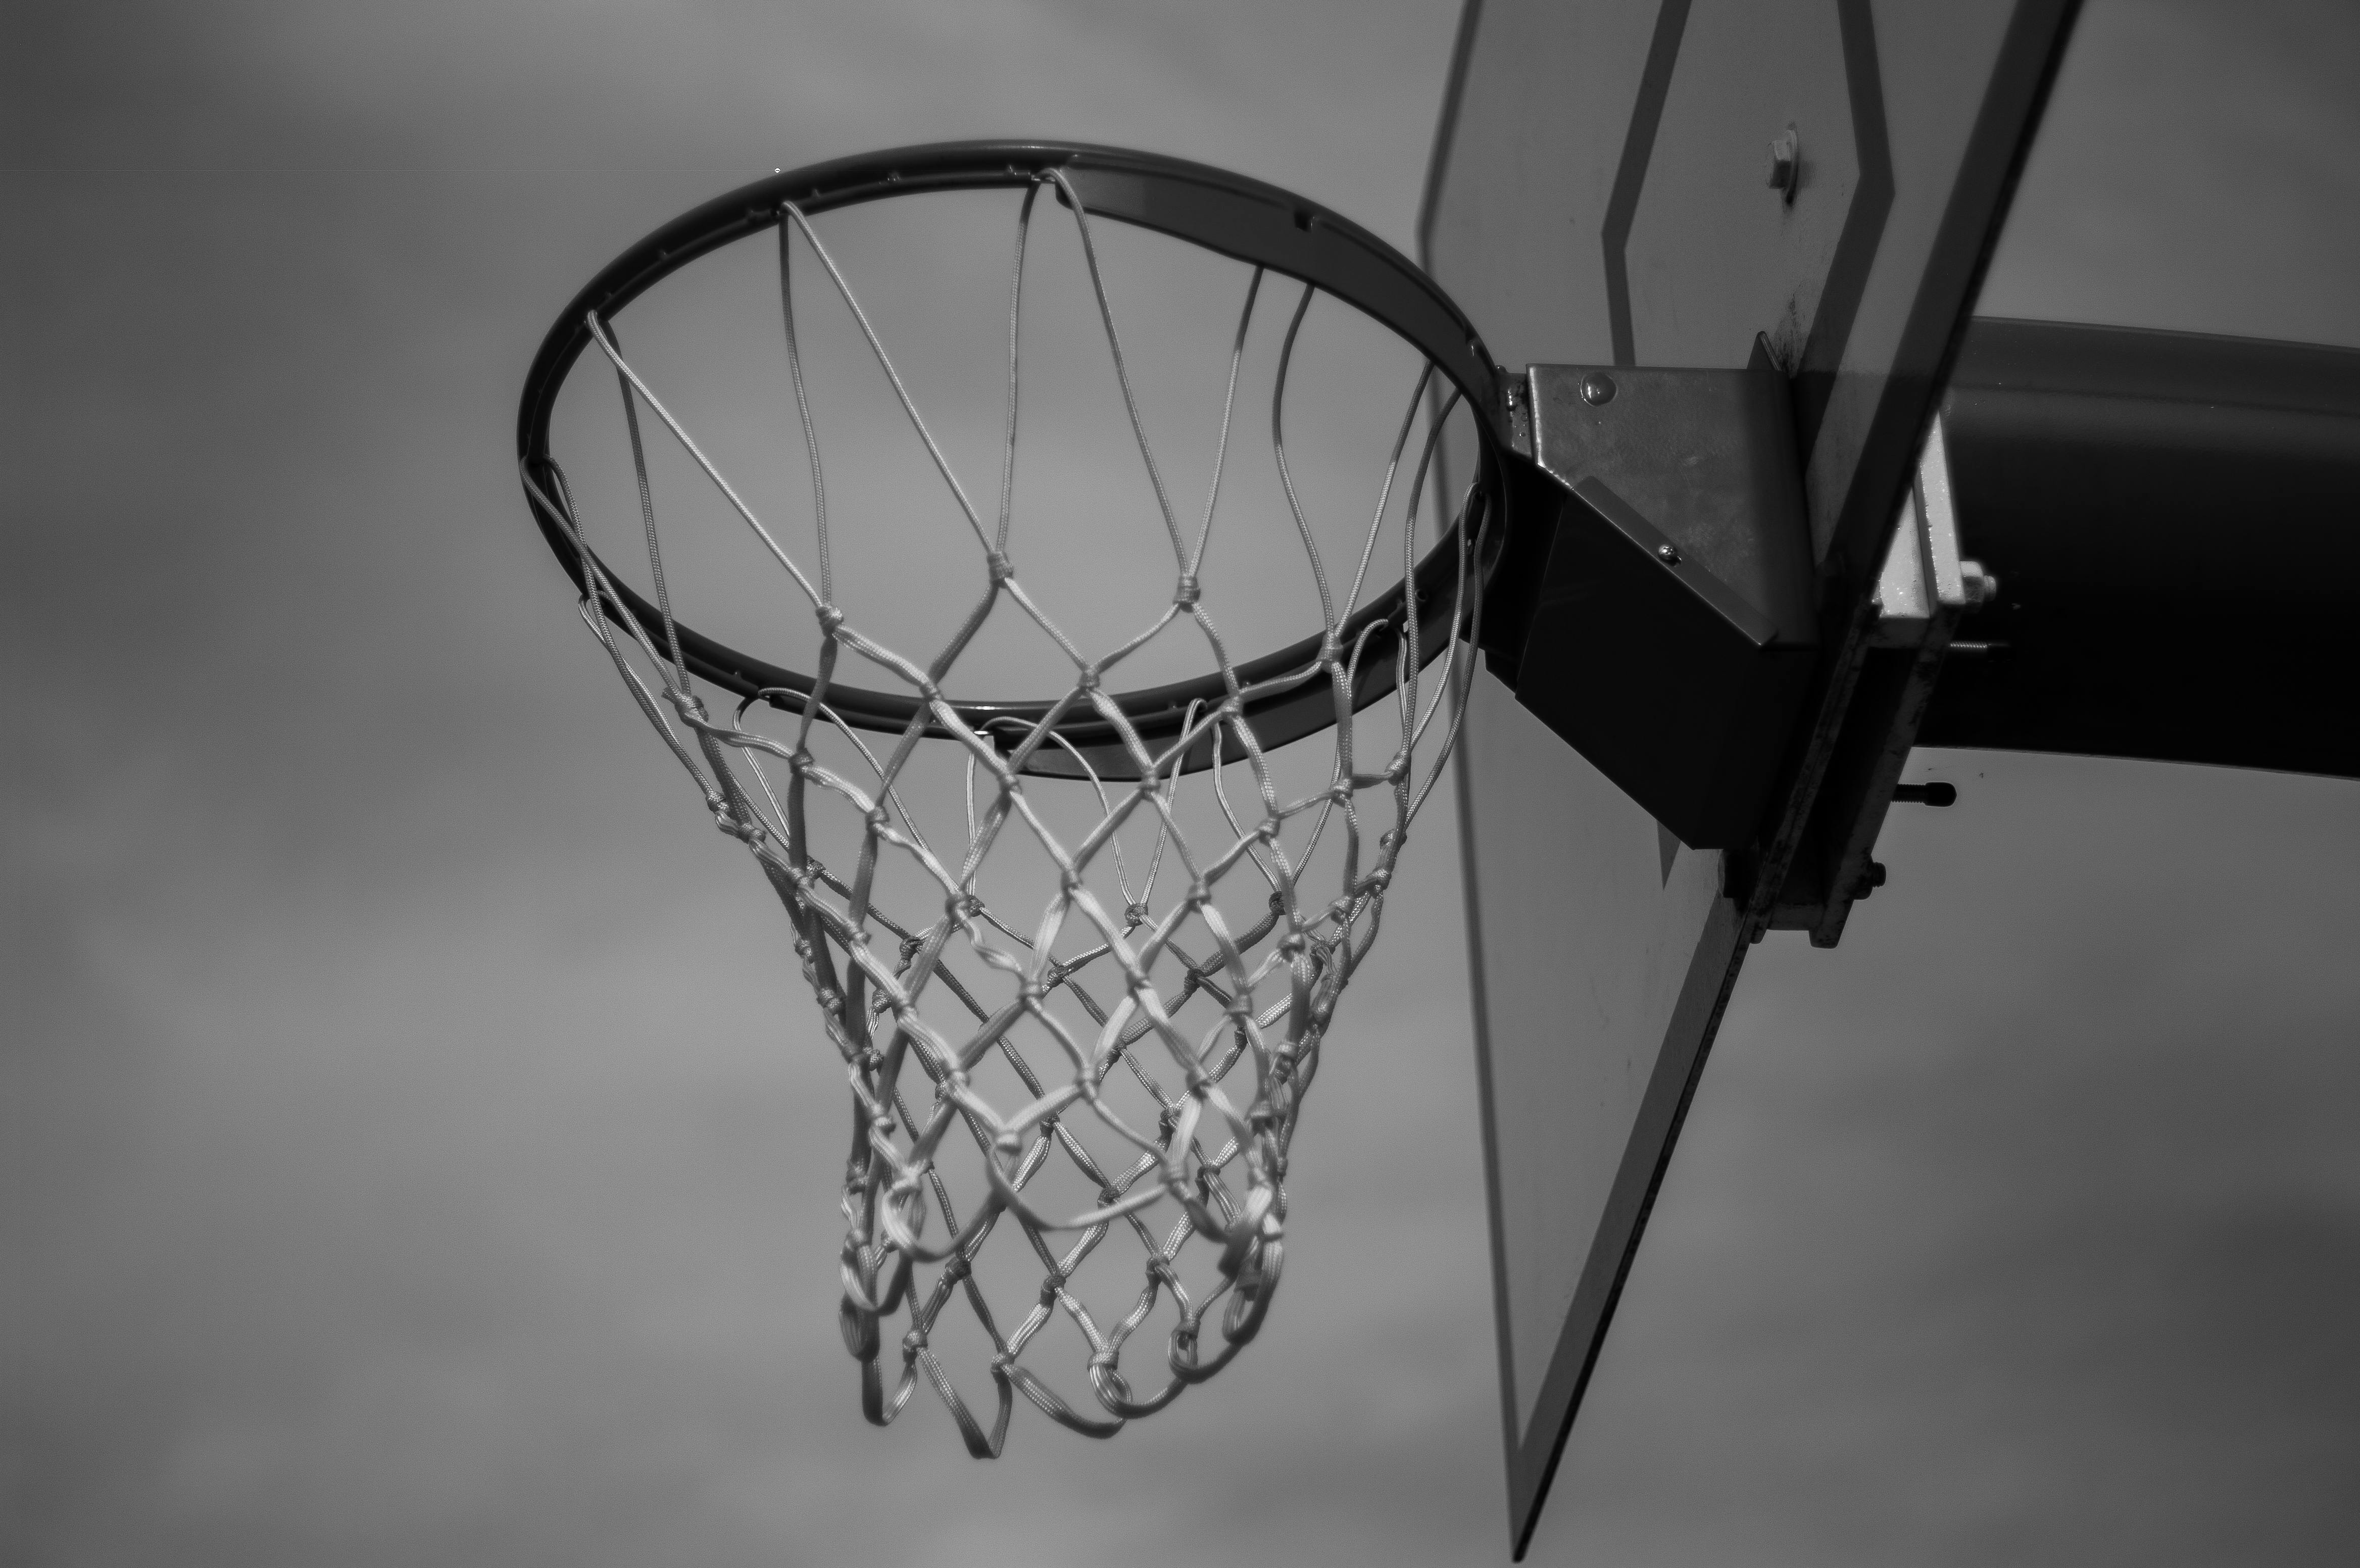 Free stock photo of arches national park, basketball, Basketball Hoop